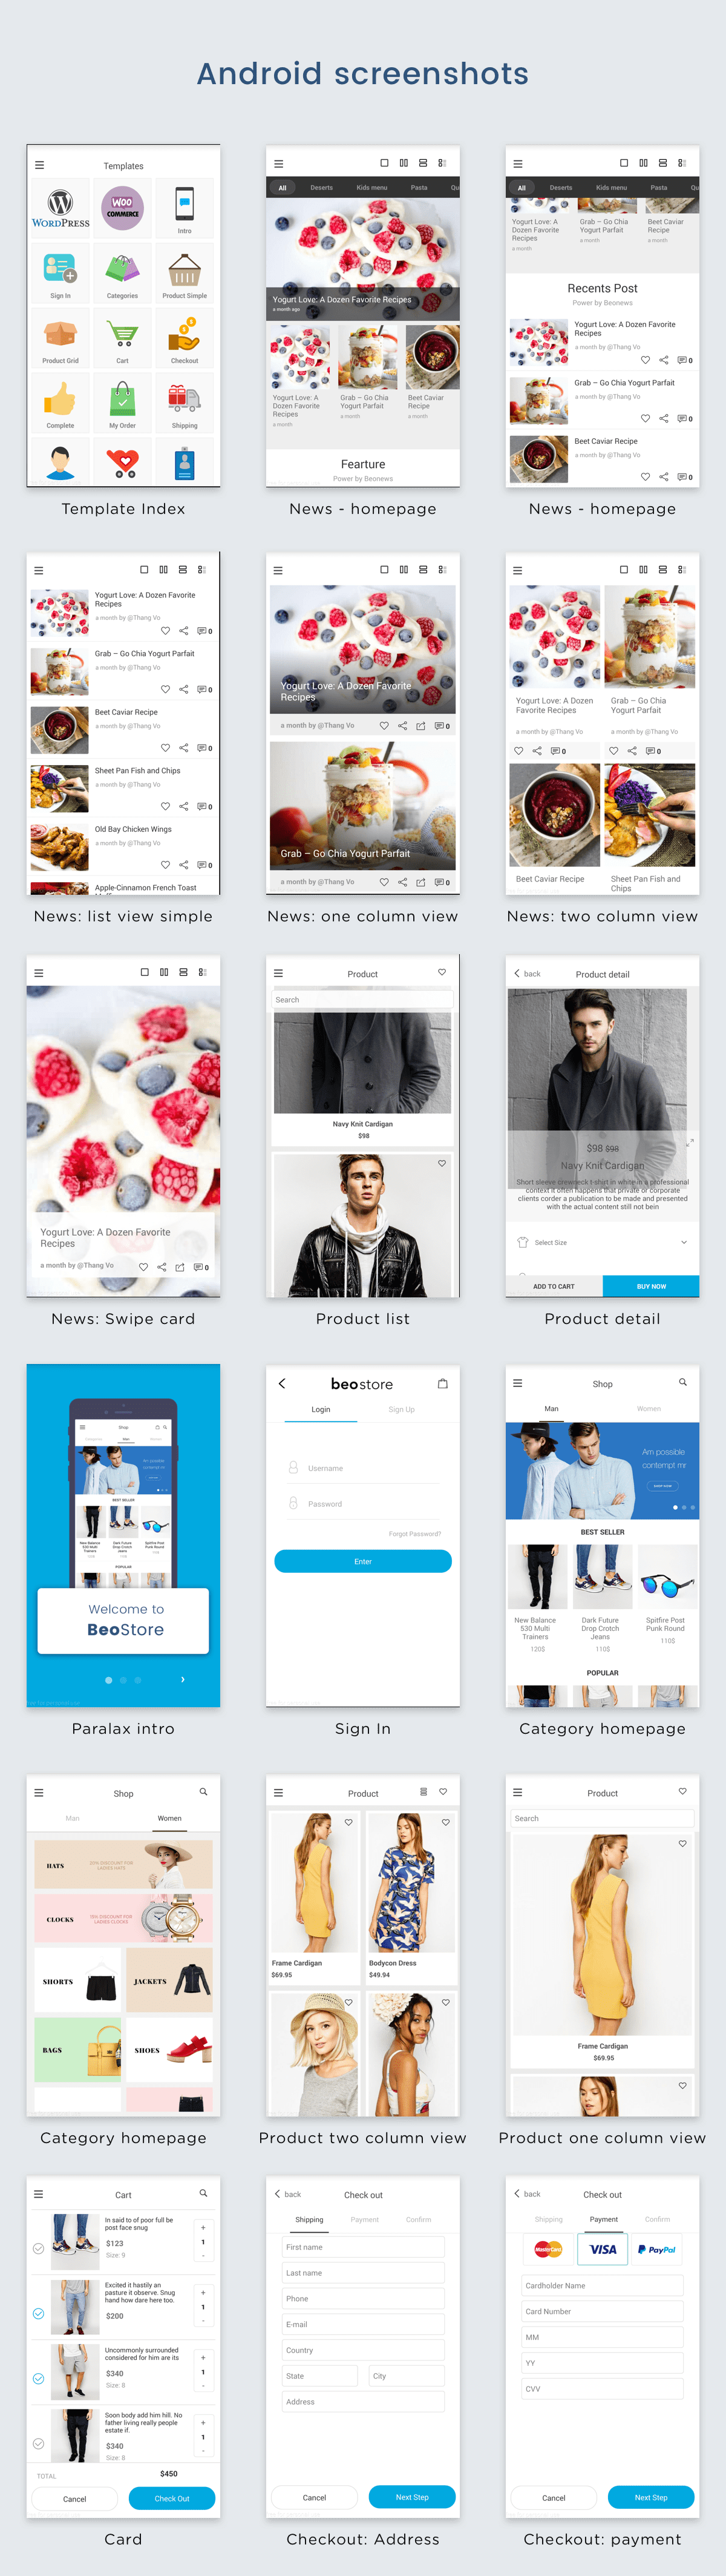 Beostore - Complete Mobile Ui Template For React Native - 8